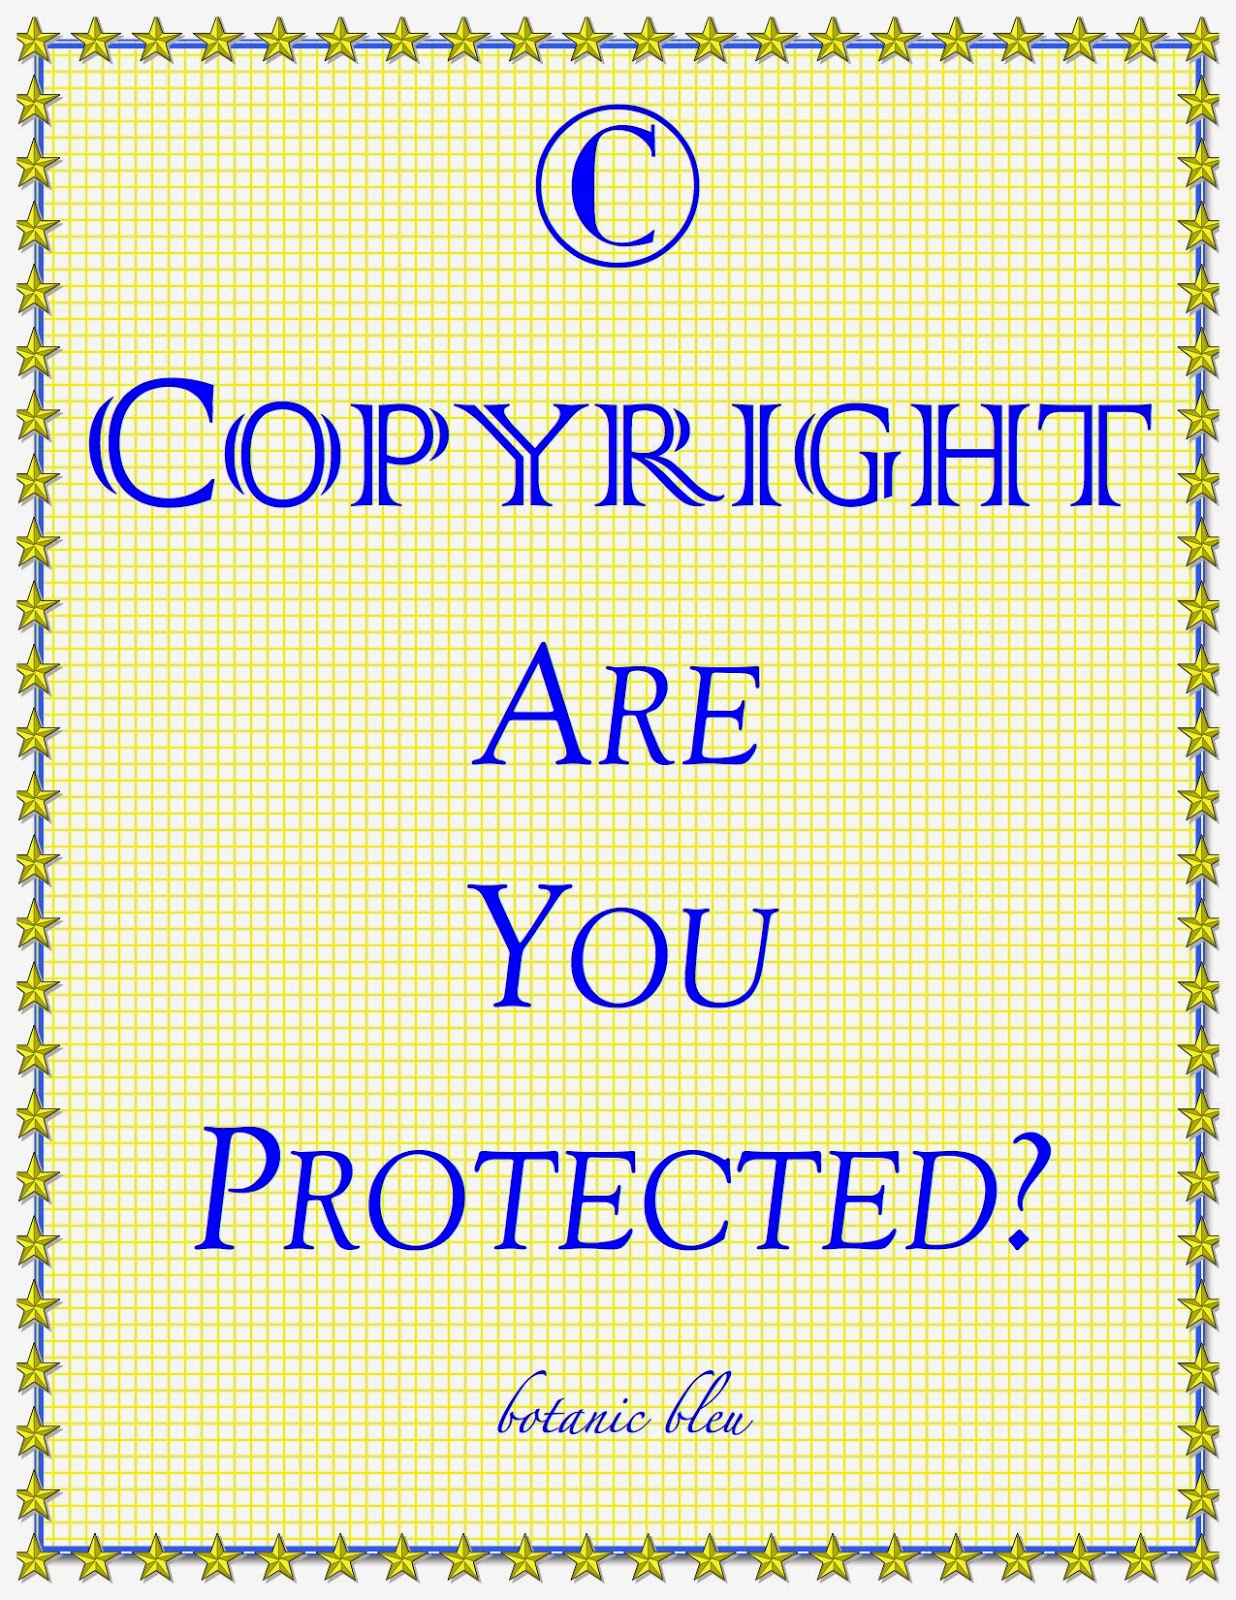 copyright-information-protect-your-work